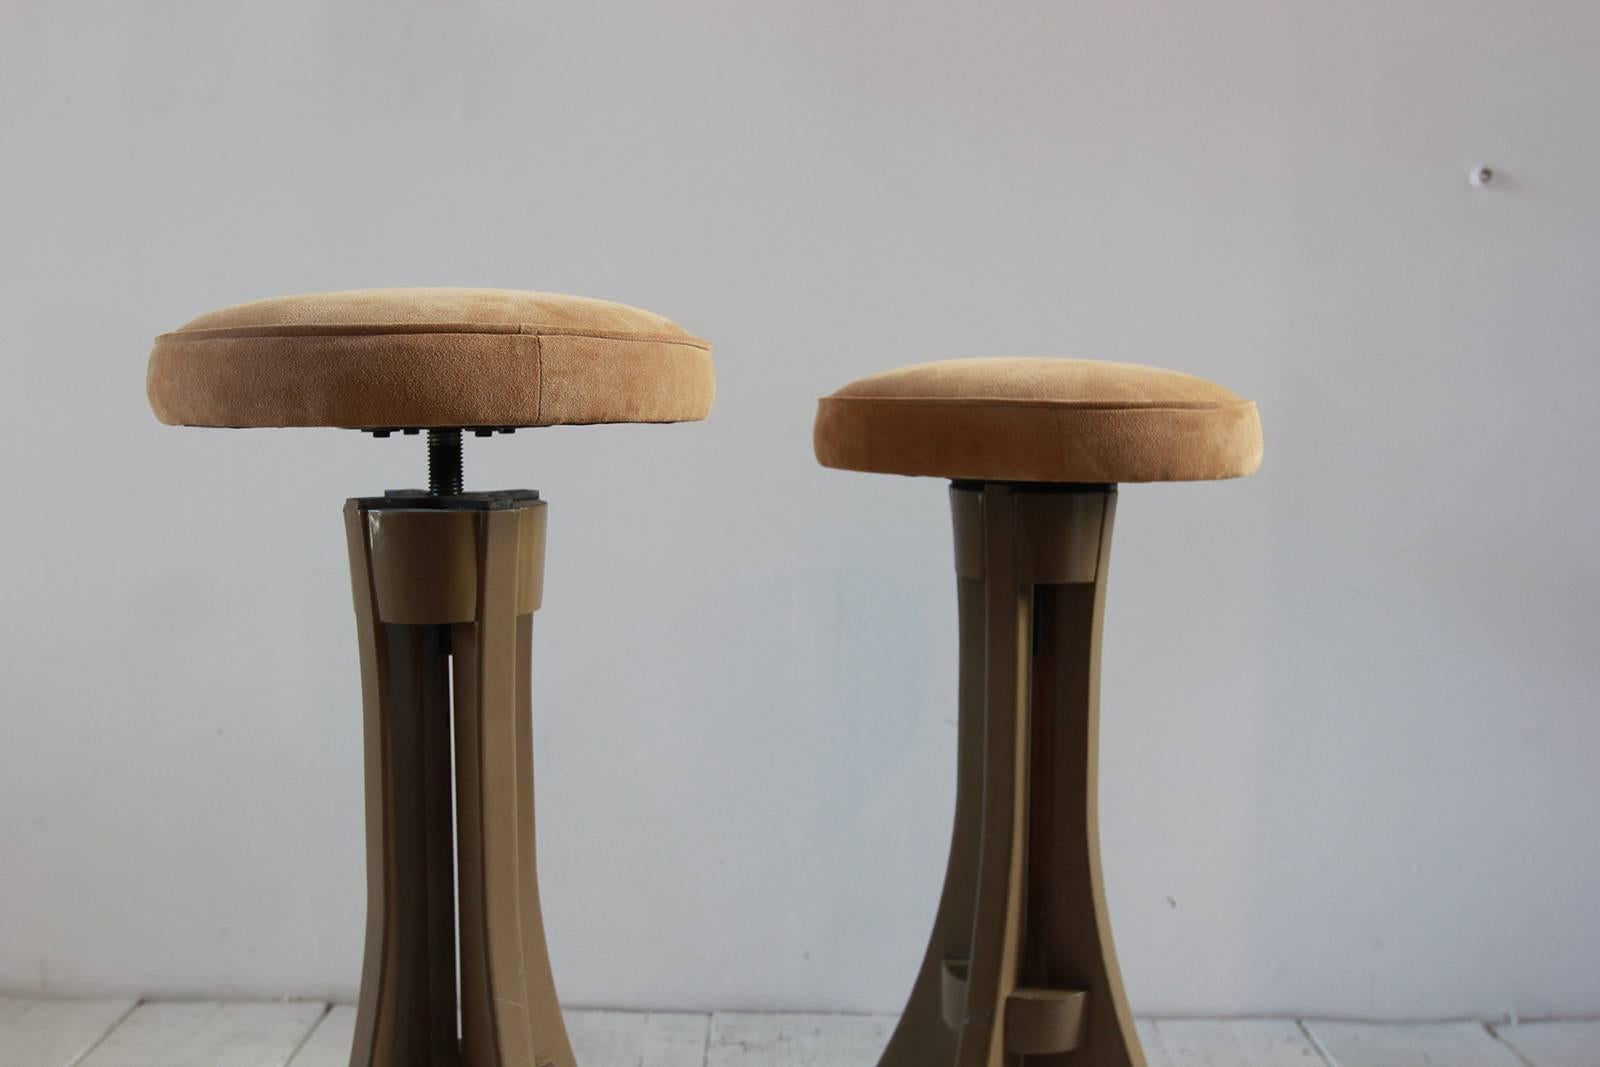 20th Century Brown Painted Stools with Suede Seat Cushion